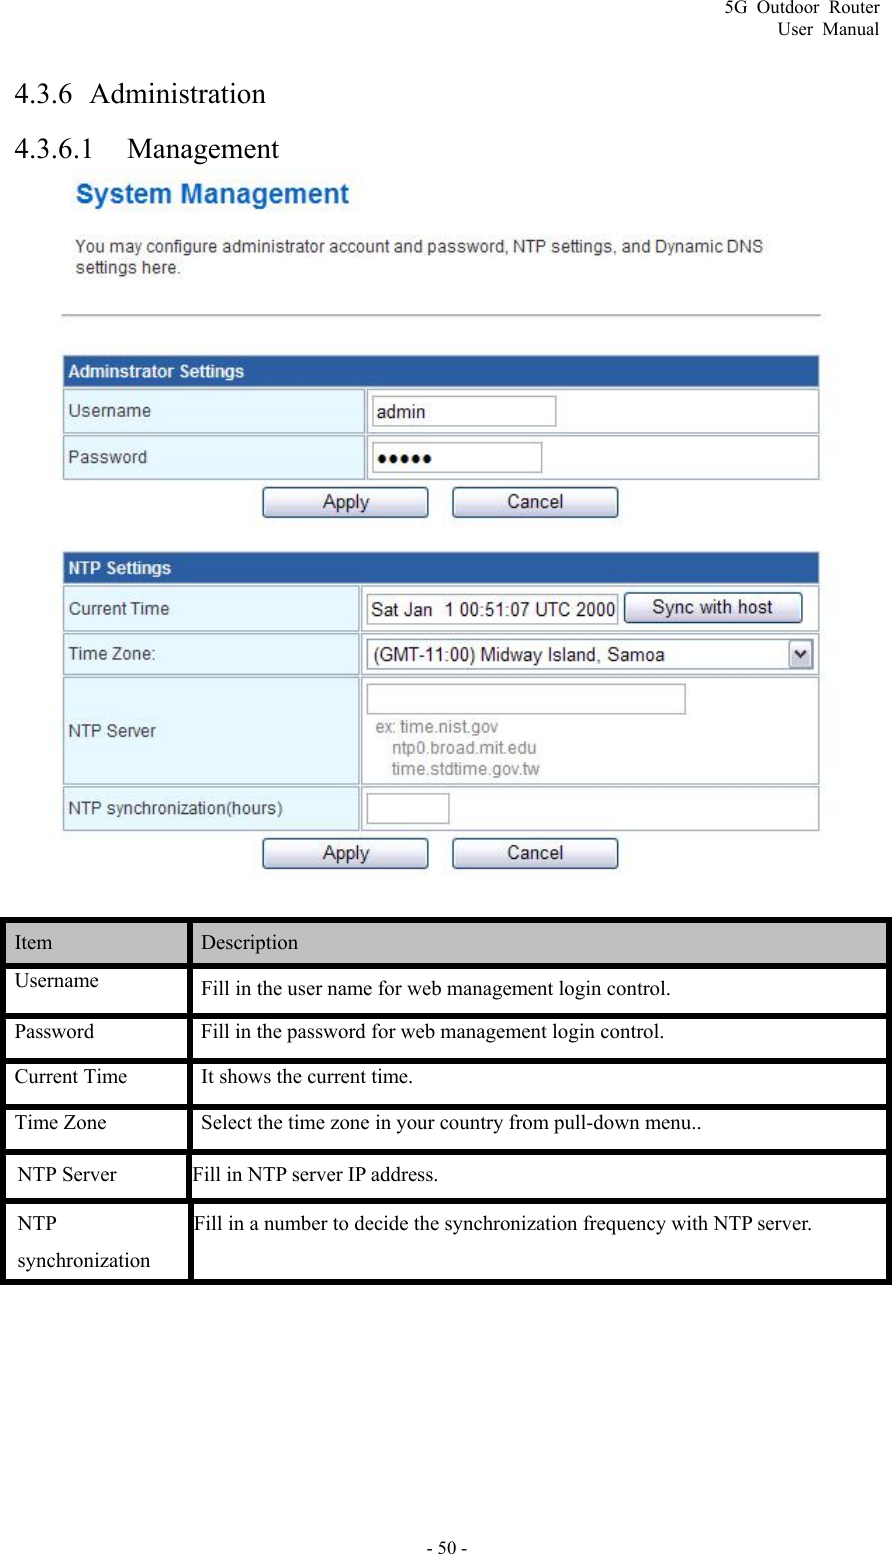 5G Outdoor Router User Manual - 50 - 4.3.6 Administration 4.3.6.1 Management   Item   Description  Username  Fill in the user name for web management login control. Password  Fill in the password for web management login control. Current Time  It shows the current time. Time Zone  Select the time zone in your country from pull-down menu.. NTP Server  Fill in NTP server IP address. NTP synchronization Fill in a number to decide the synchronization frequency with NTP server. 